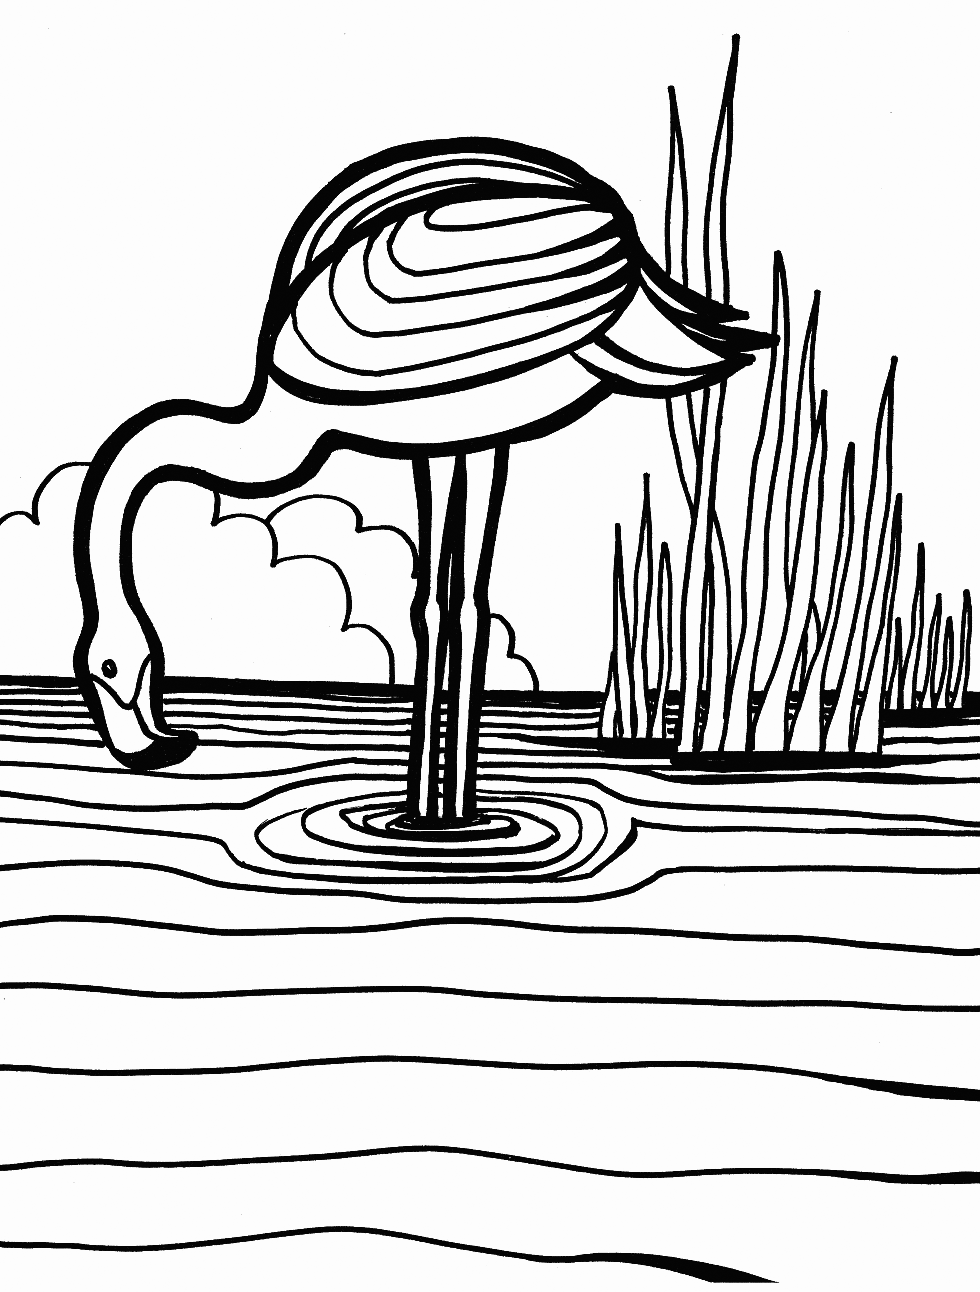 Download Flamingo Coloring Pages Best Coloring Pages For Kids